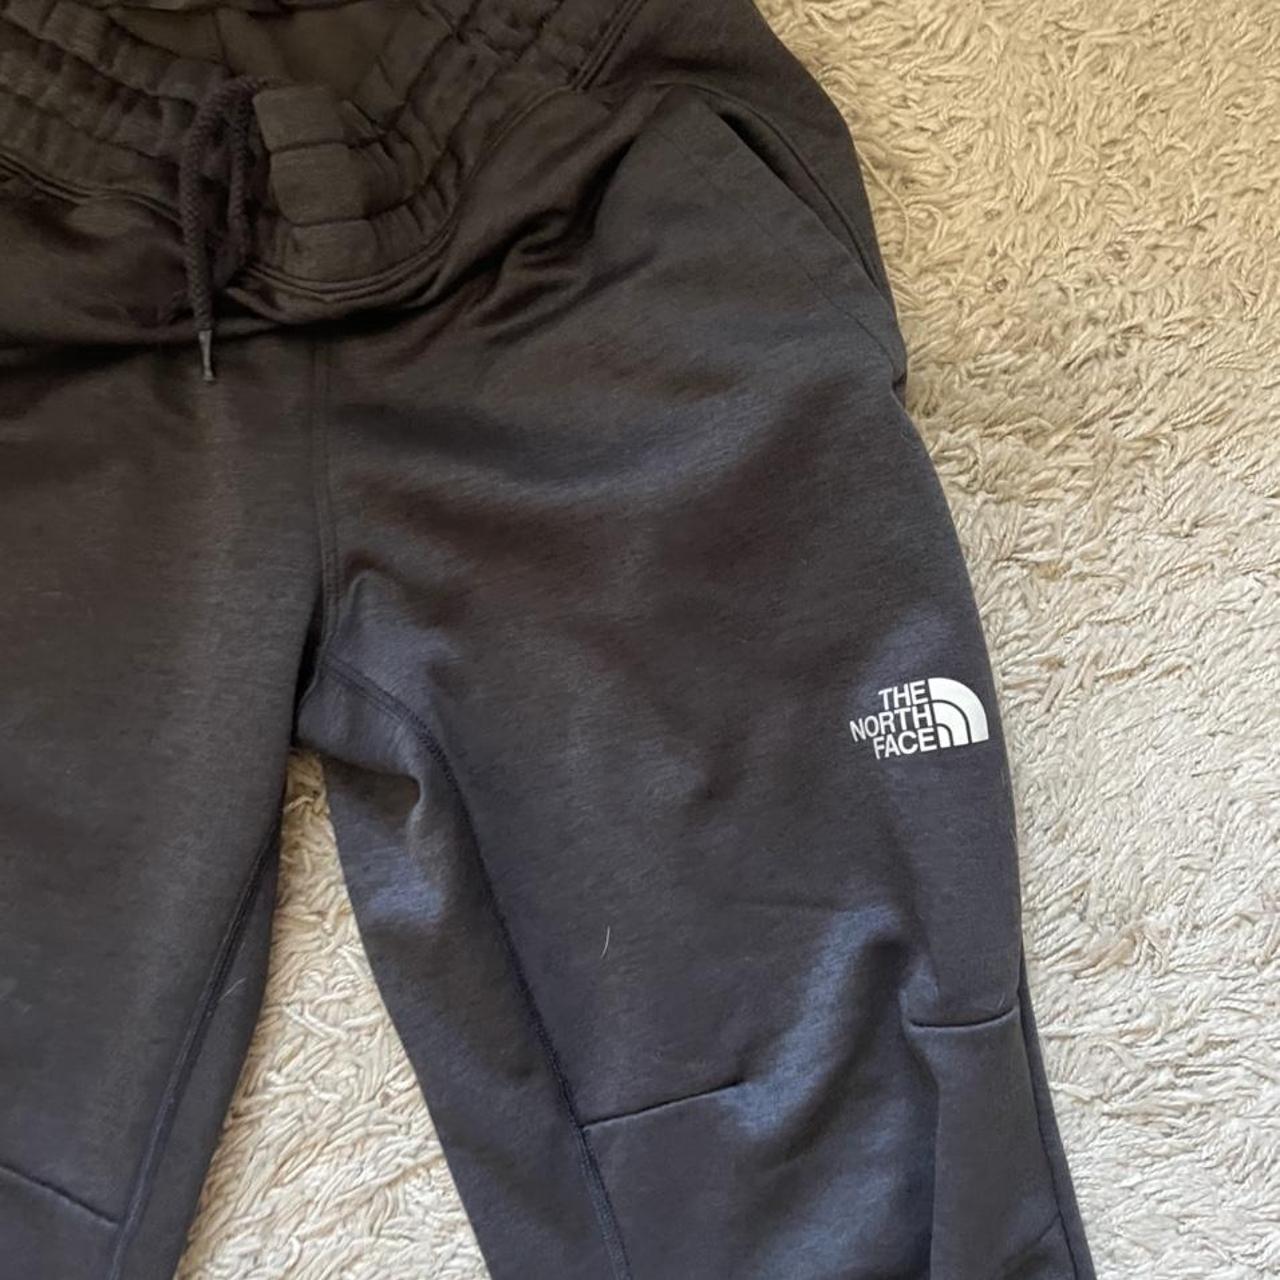 North Face Bottoms - North Face Tracksuit - North... - Depop